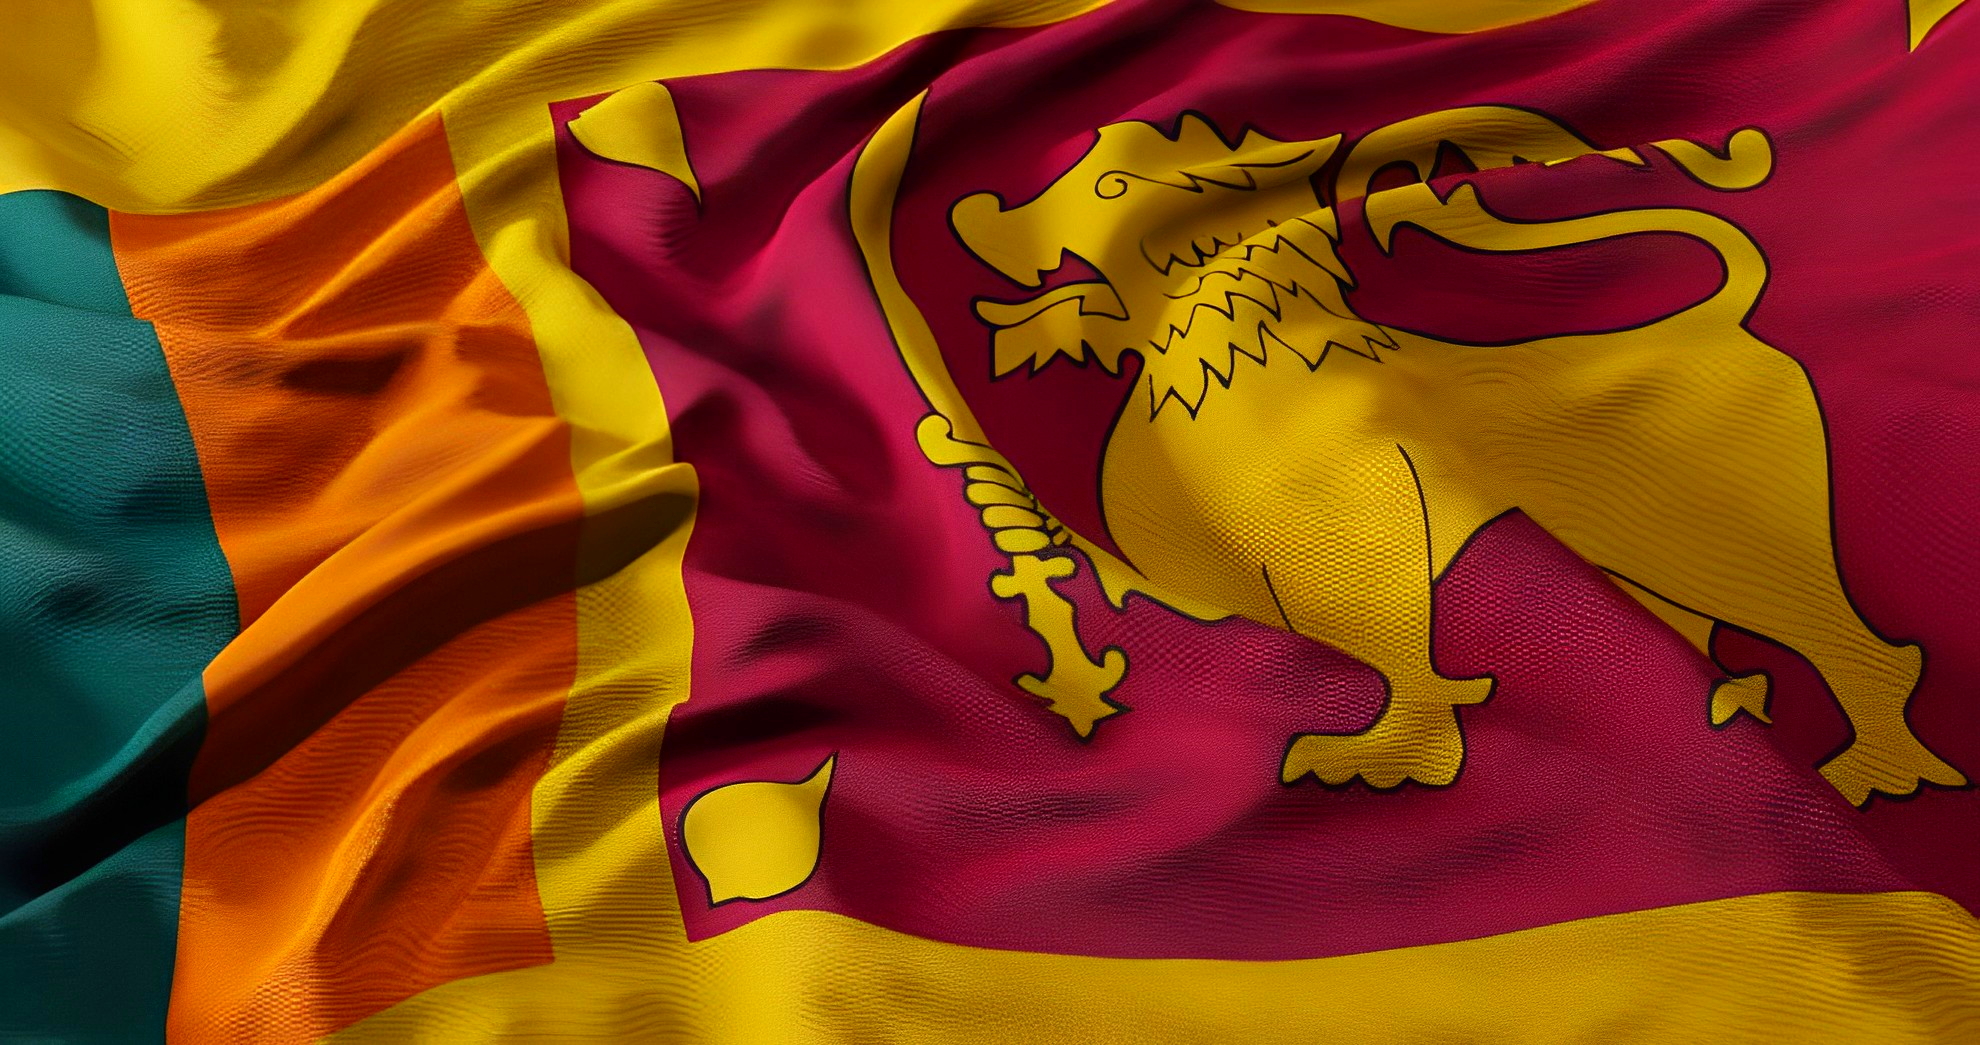 An Overview of the Sri Lanka eCommerce Sector